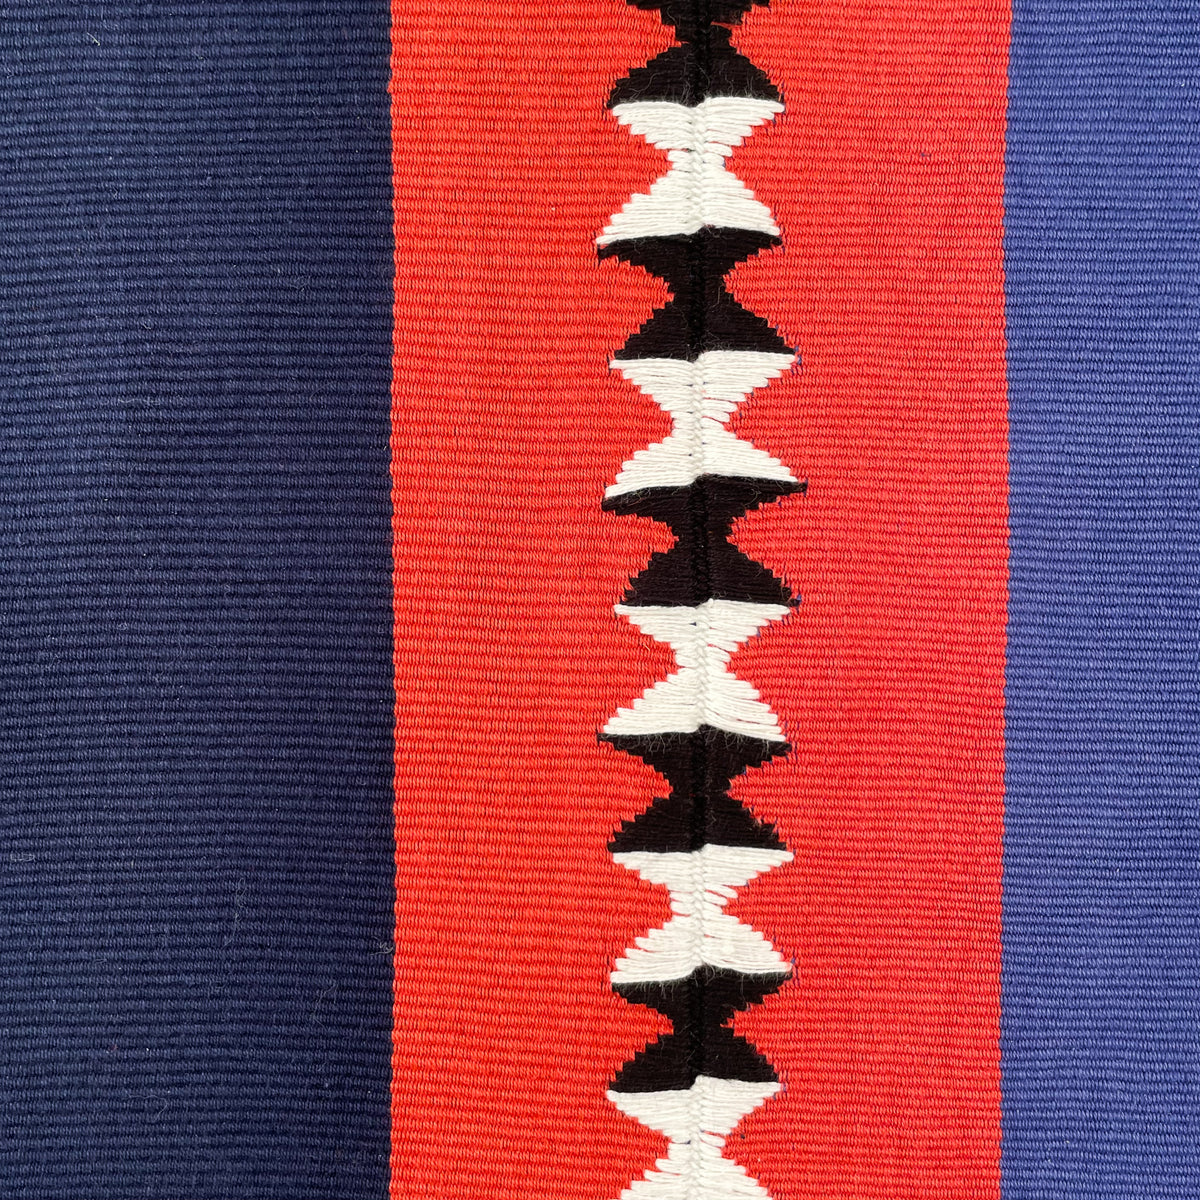 Close up swatch of cushion cover with color block panels in navy, red with black and white randa detail, and purple